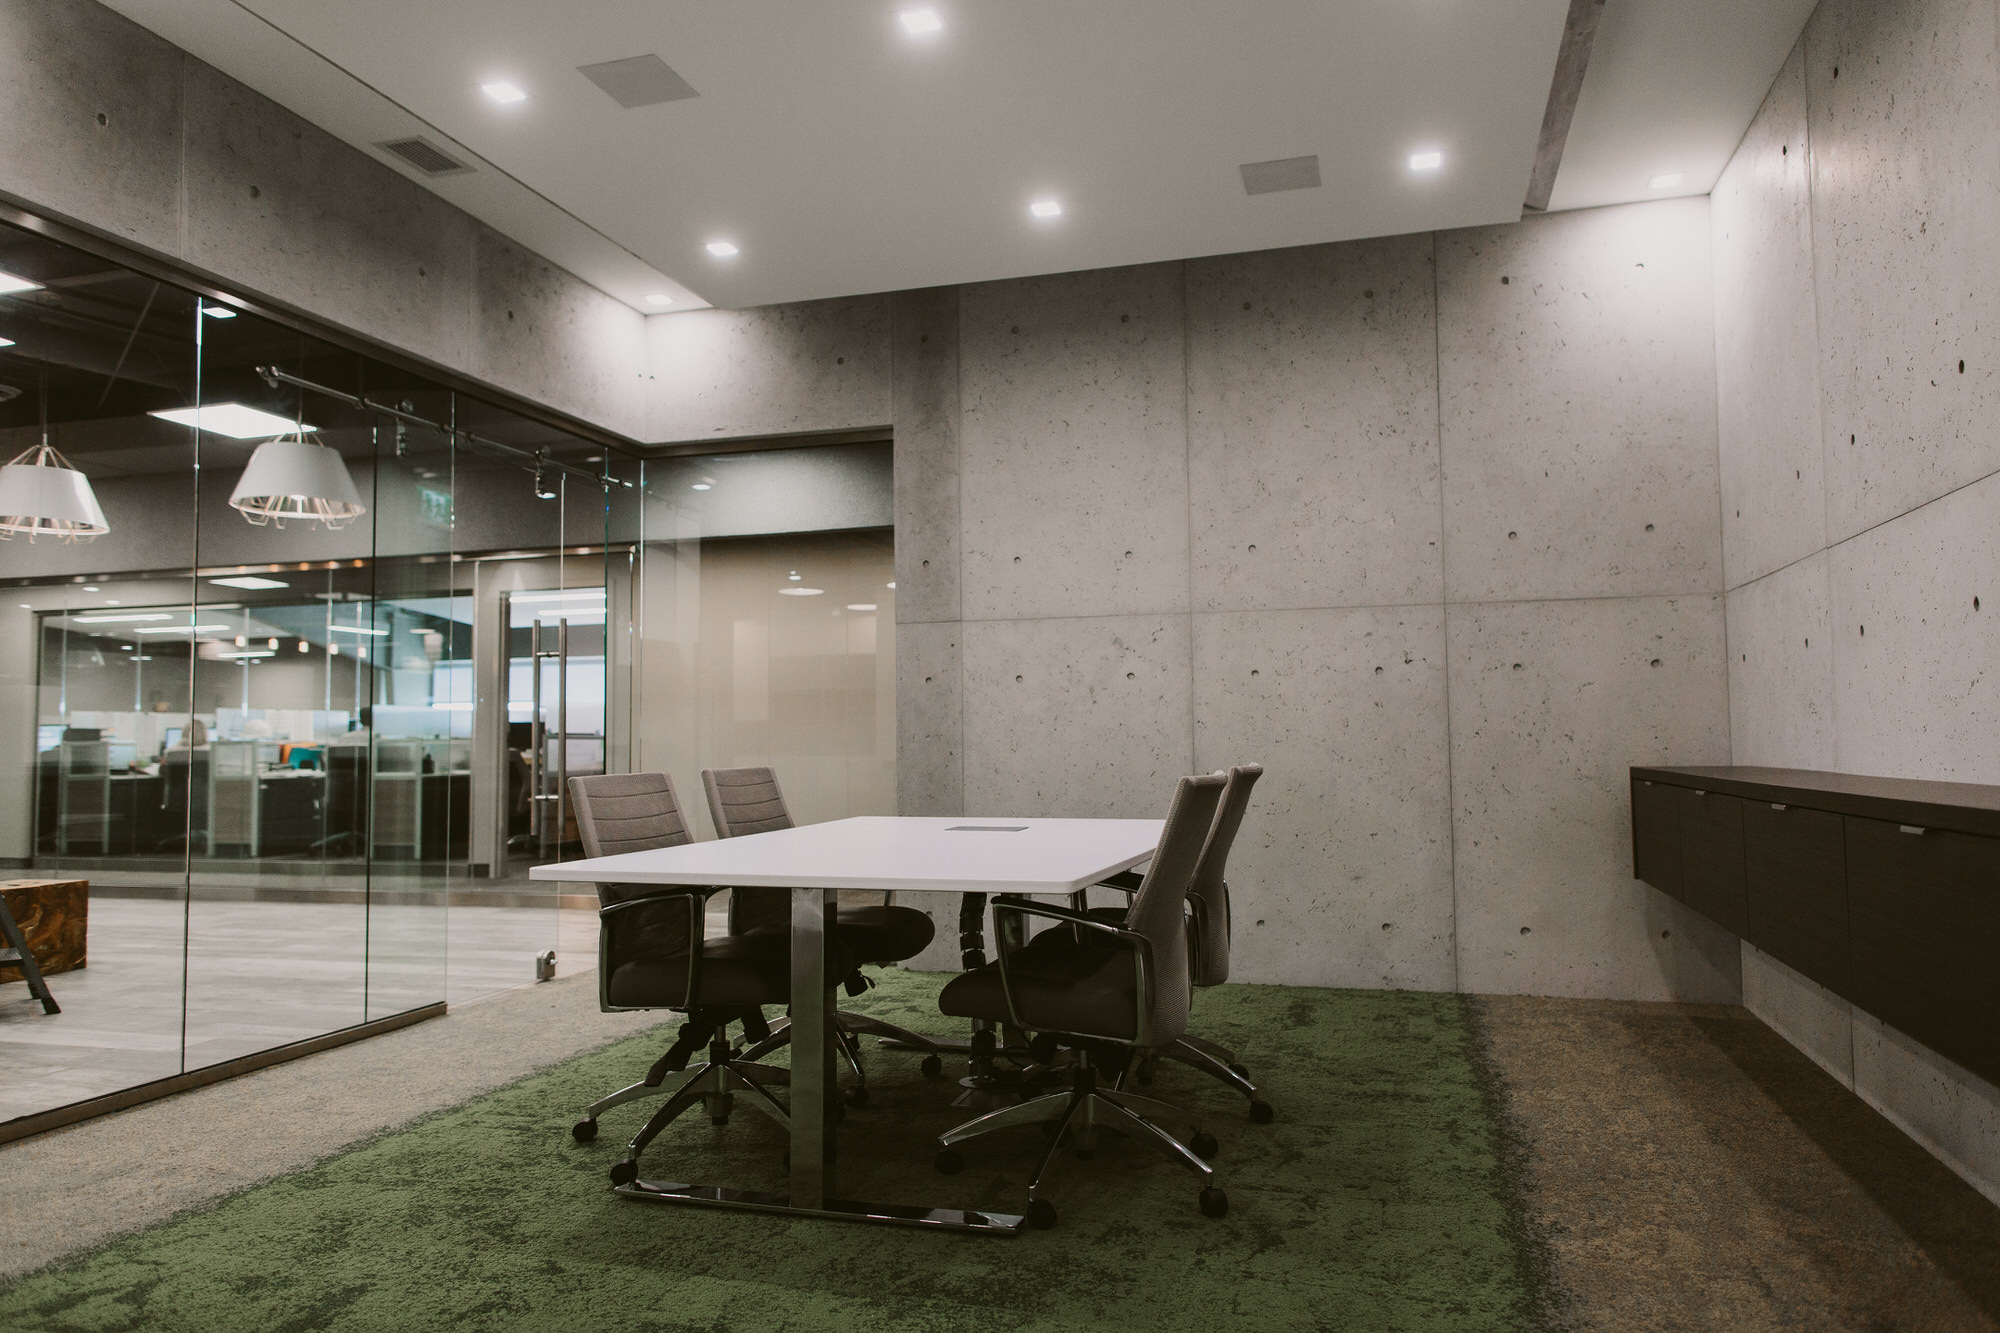 Meeting Room's wall made with Concrete Cladding